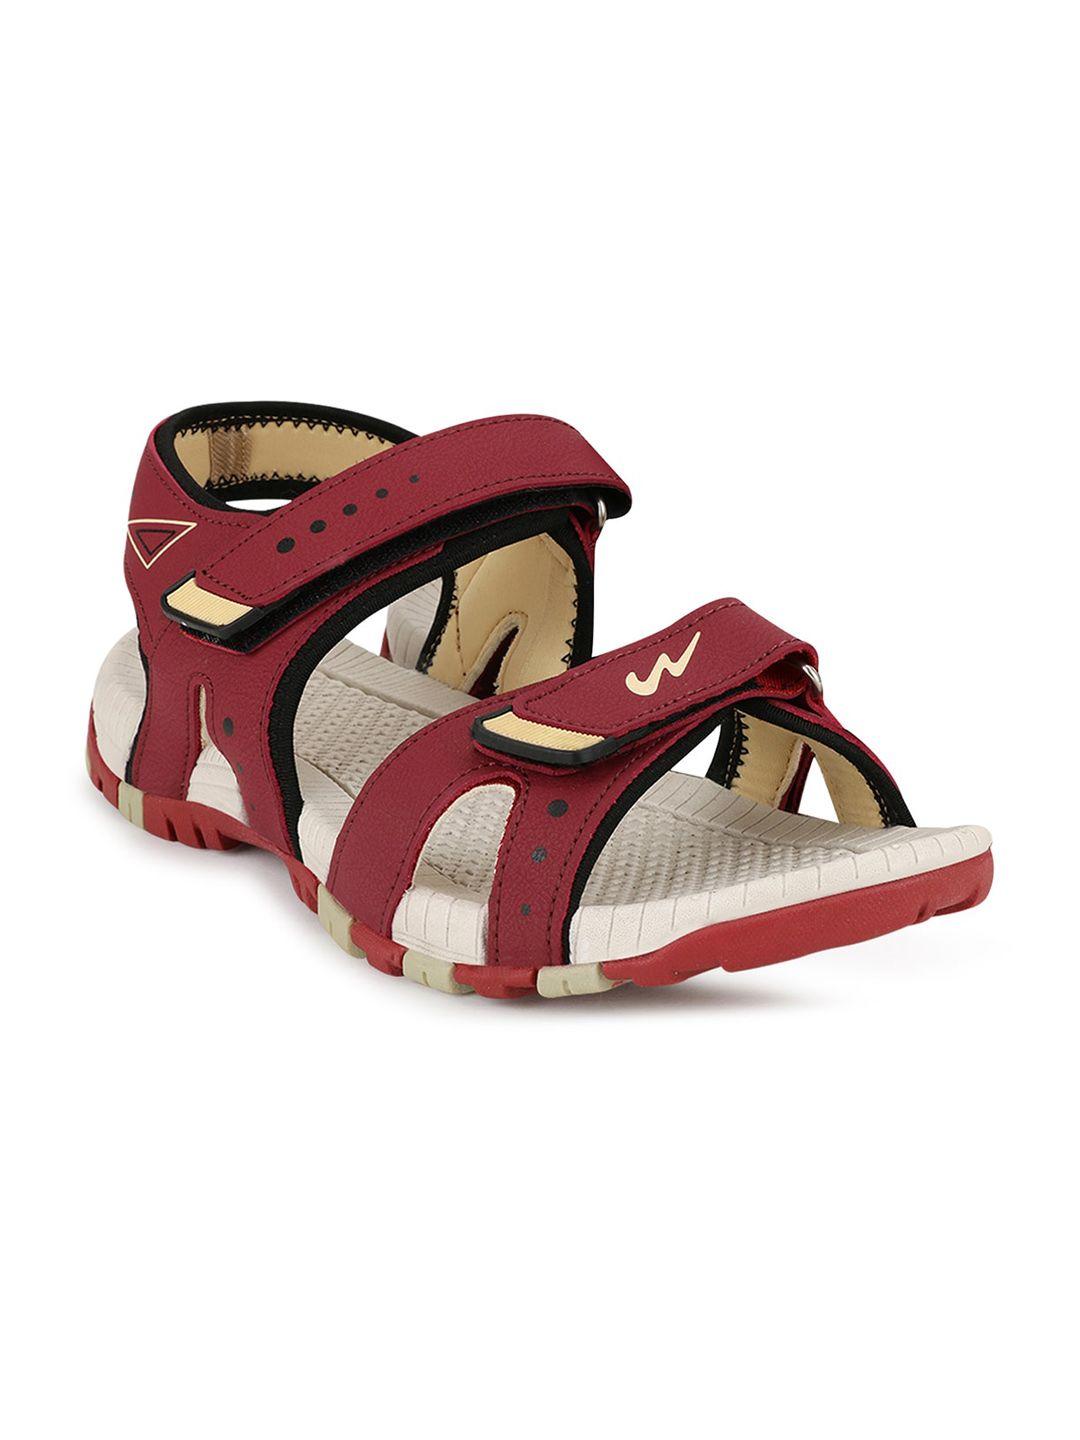 campus-men-maroon-patterned-sports-sandals